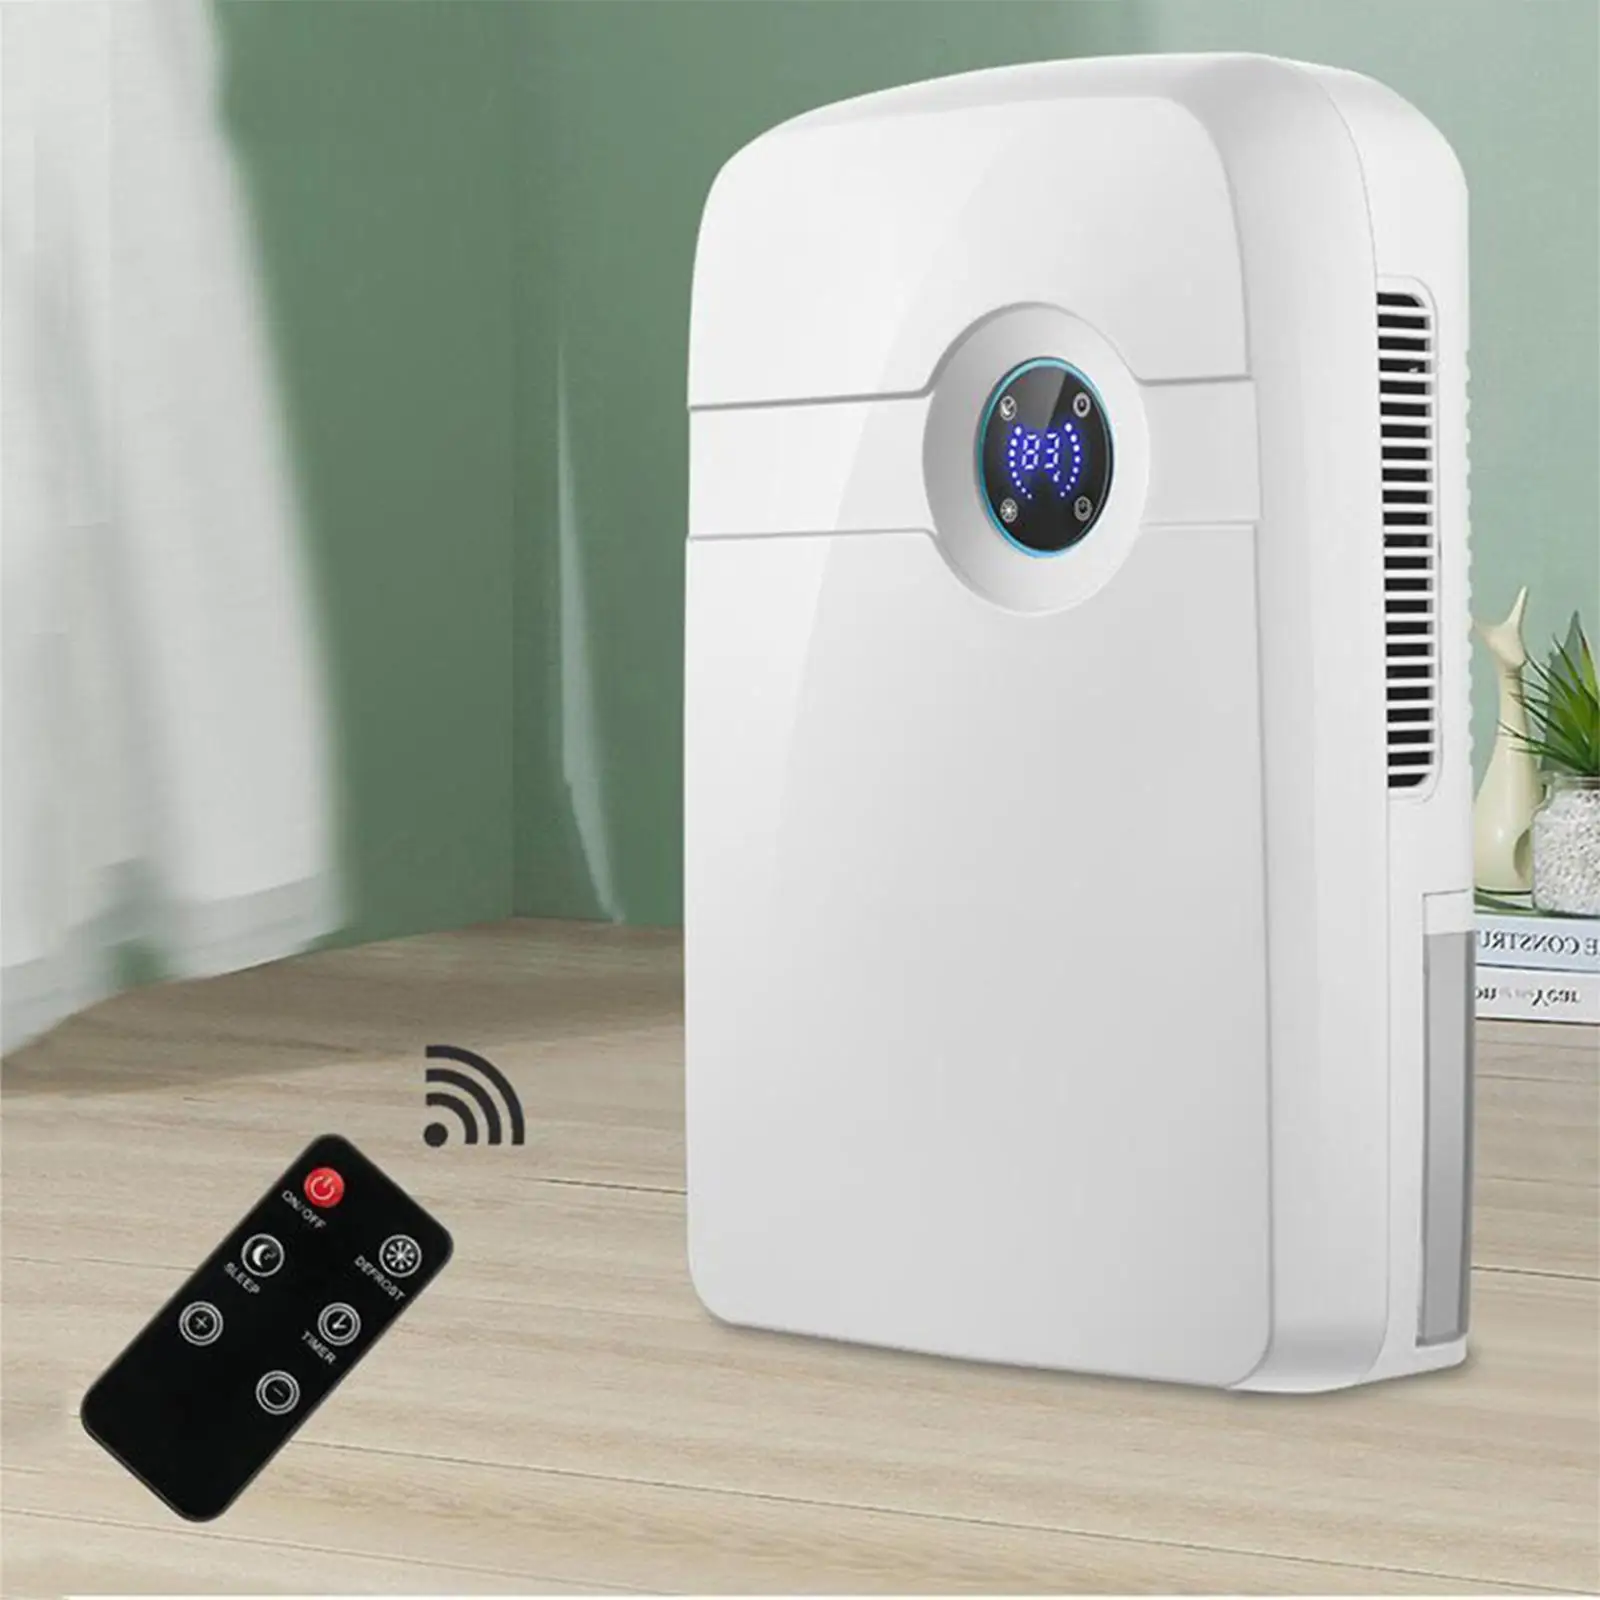 Portable Electric Dehumidifier & 2.5L Water Tank for Home Bathroom 